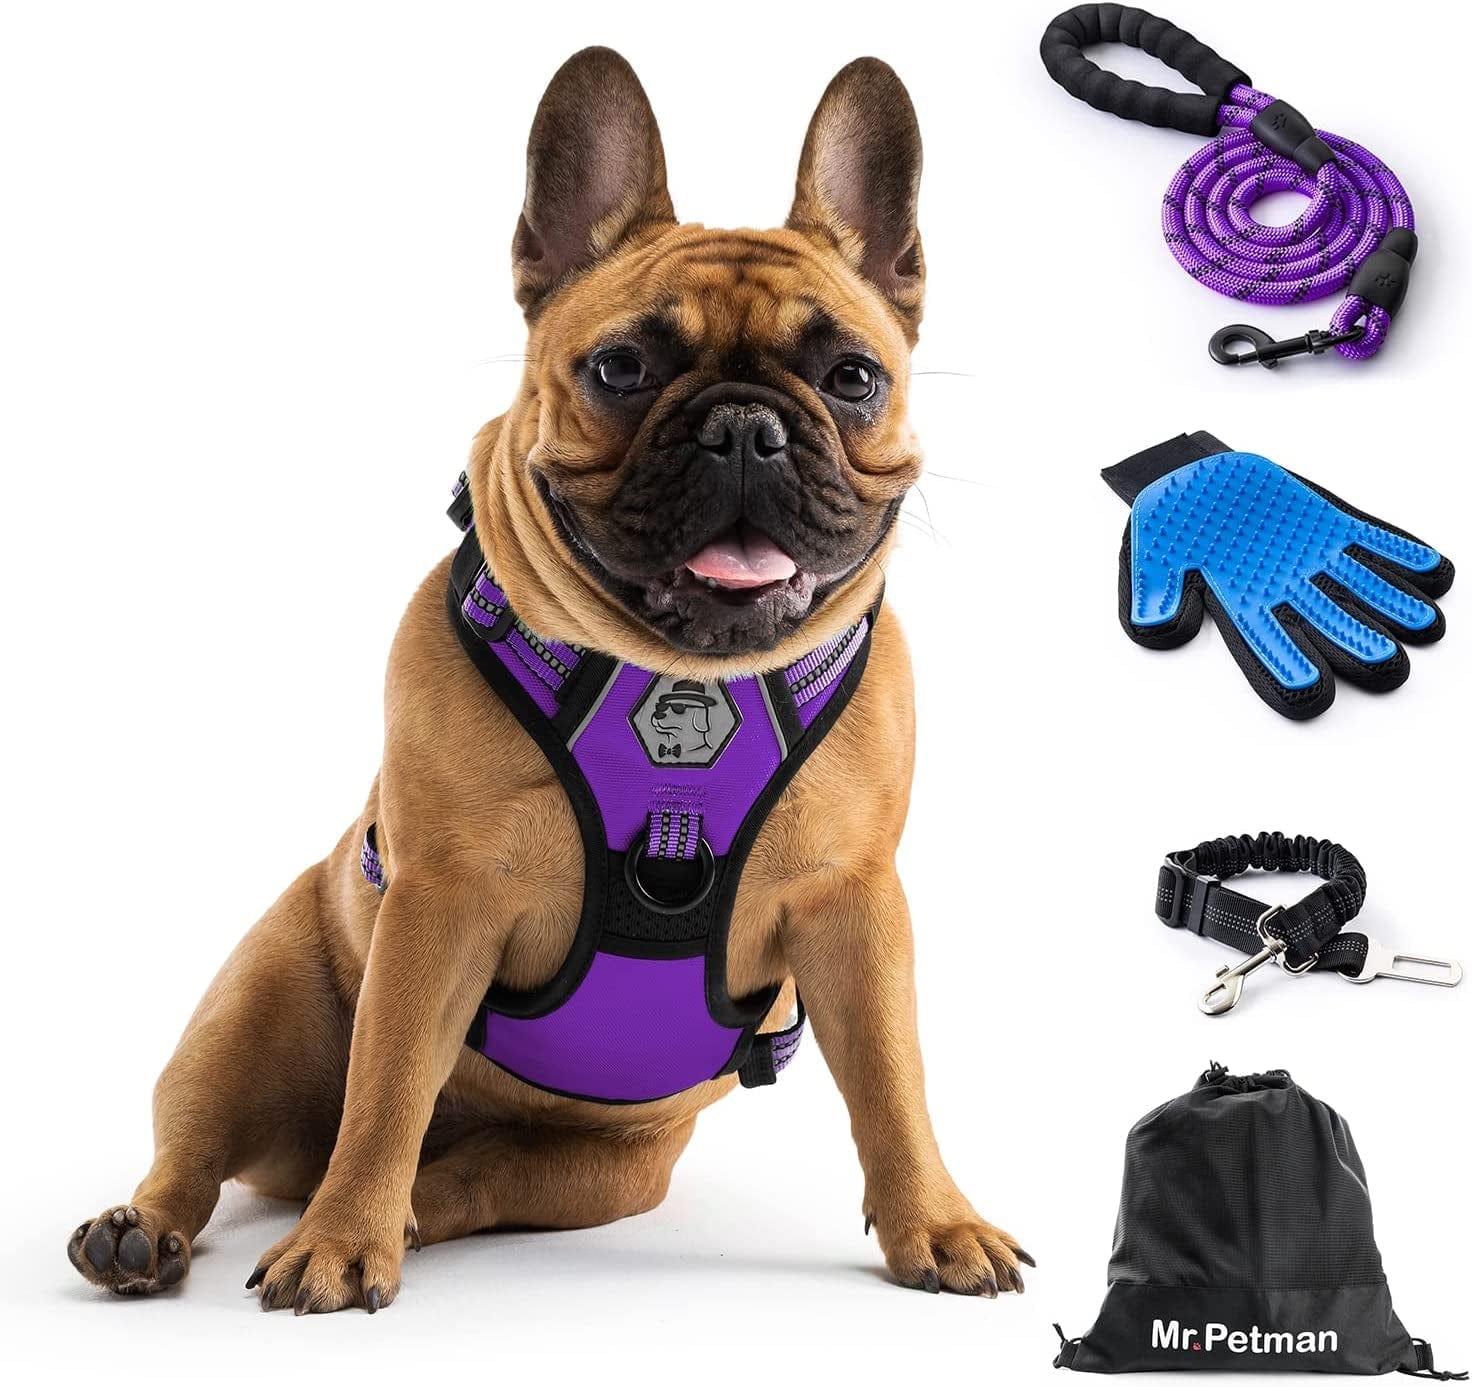 MR. PETMAN No Pull Dog Harness with Leash, Seat Belt, Grooming Glove - No Choke Dog Harness Set for Small Medium Large Dogs- Reflective Adjustable Dog Vest Harnesses with Handle for Walking Training Animals & Pet Supplies > Pet Supplies > Dog Supplies > Dog Apparel Mr. Petman Modern Purple Small 